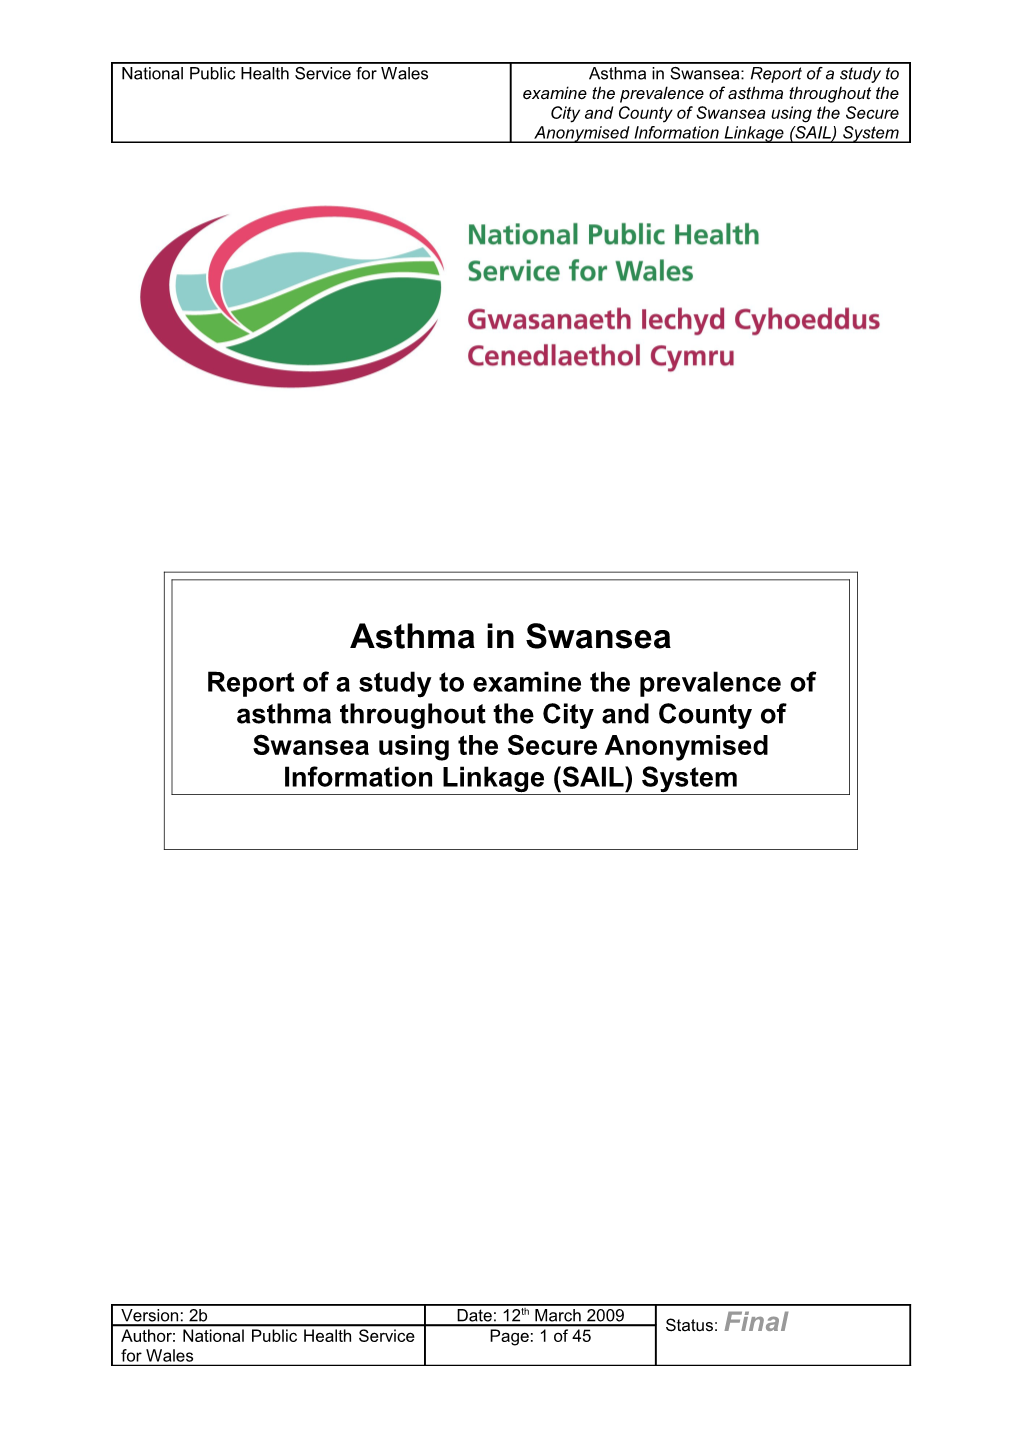 2009 National Public Health Service for Wales